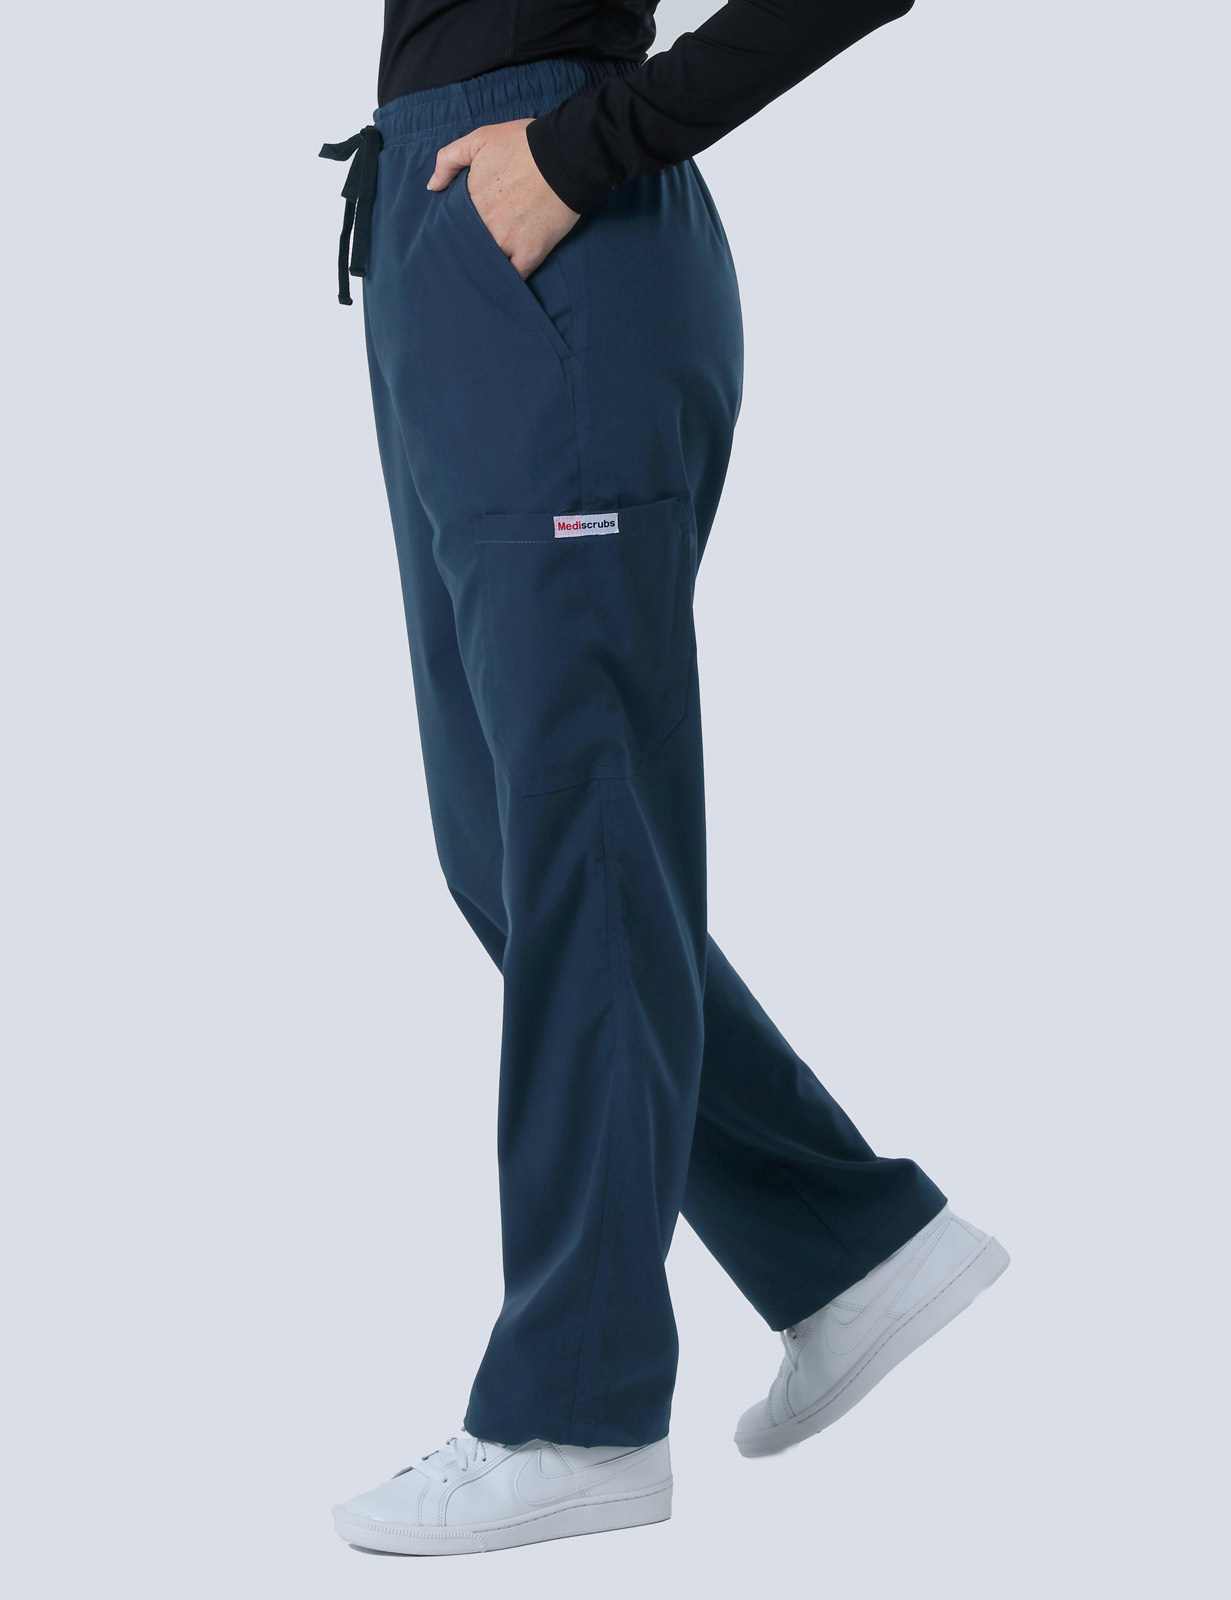 Weipa Hospital - ED CN (Women's Fit Solid Scrub Top and Cargo Pants in Navy incl Logos)